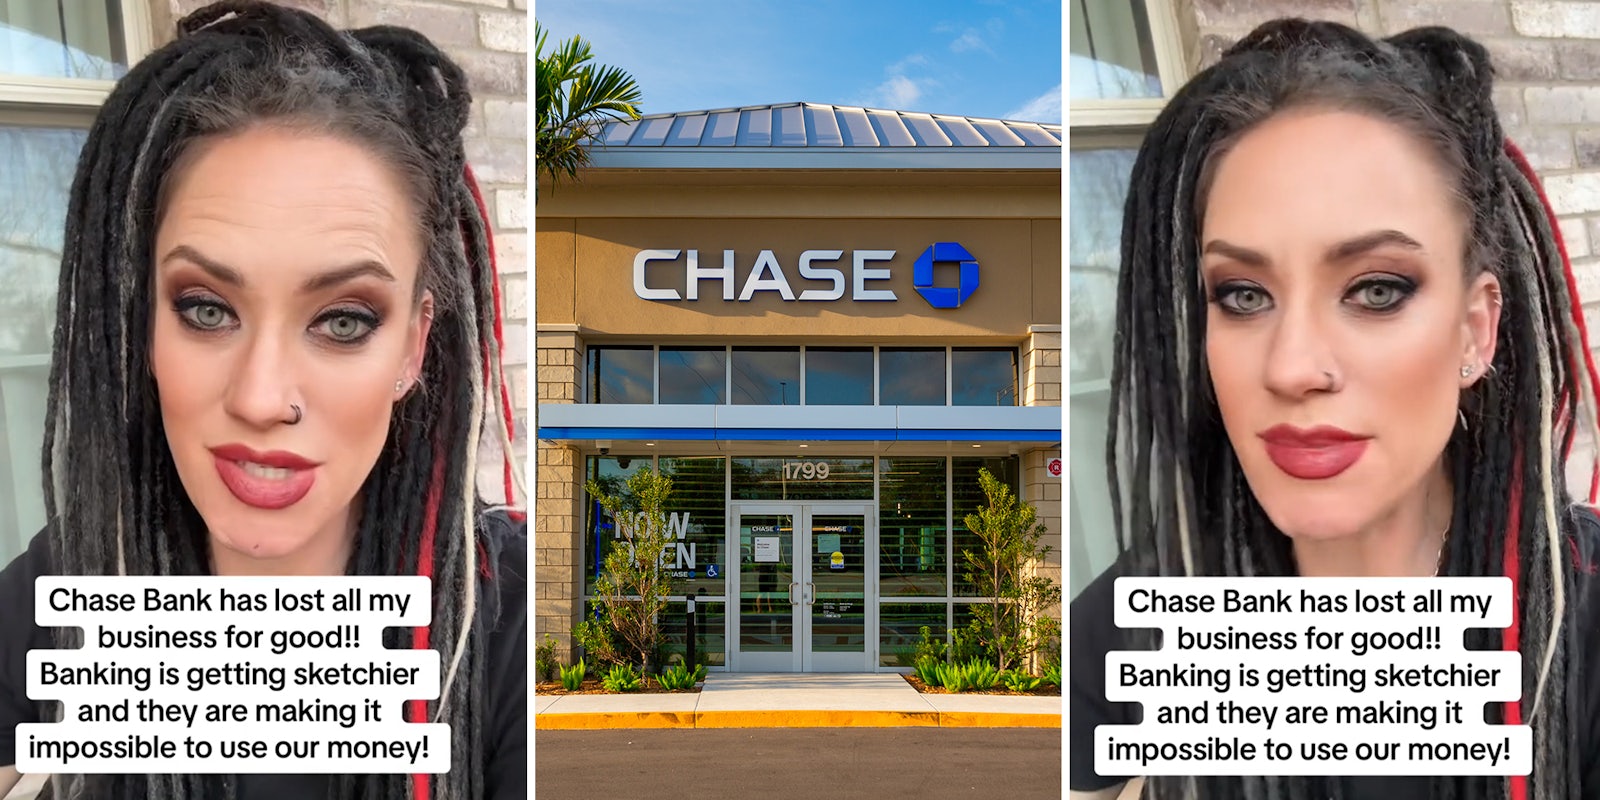 chase customer says her accounts were frozen for days. She can’t believe the reason